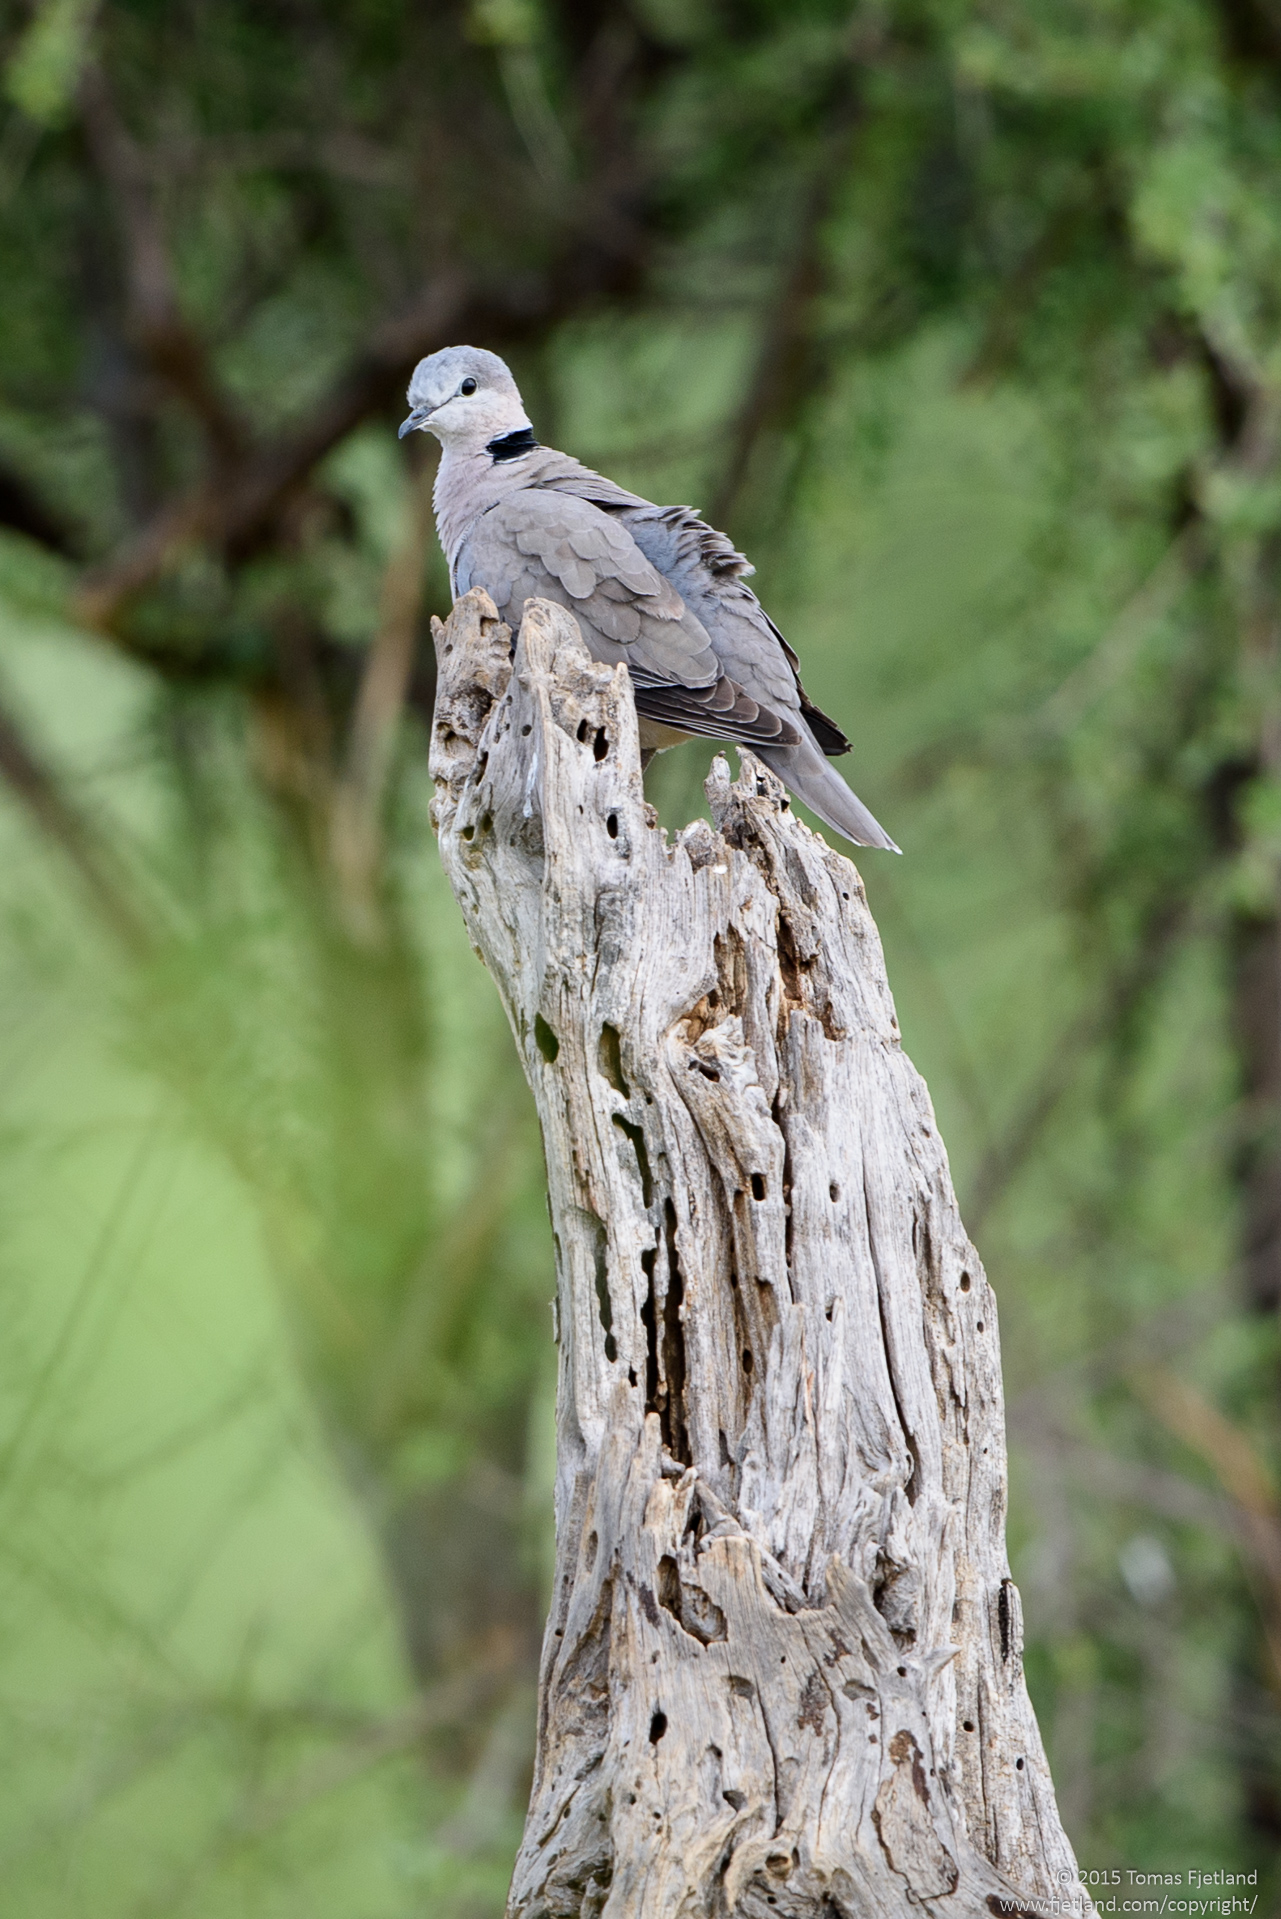 This ring-necked dove was very hard to spot on a distance, as it sat completely still as a n extension of the dead tree